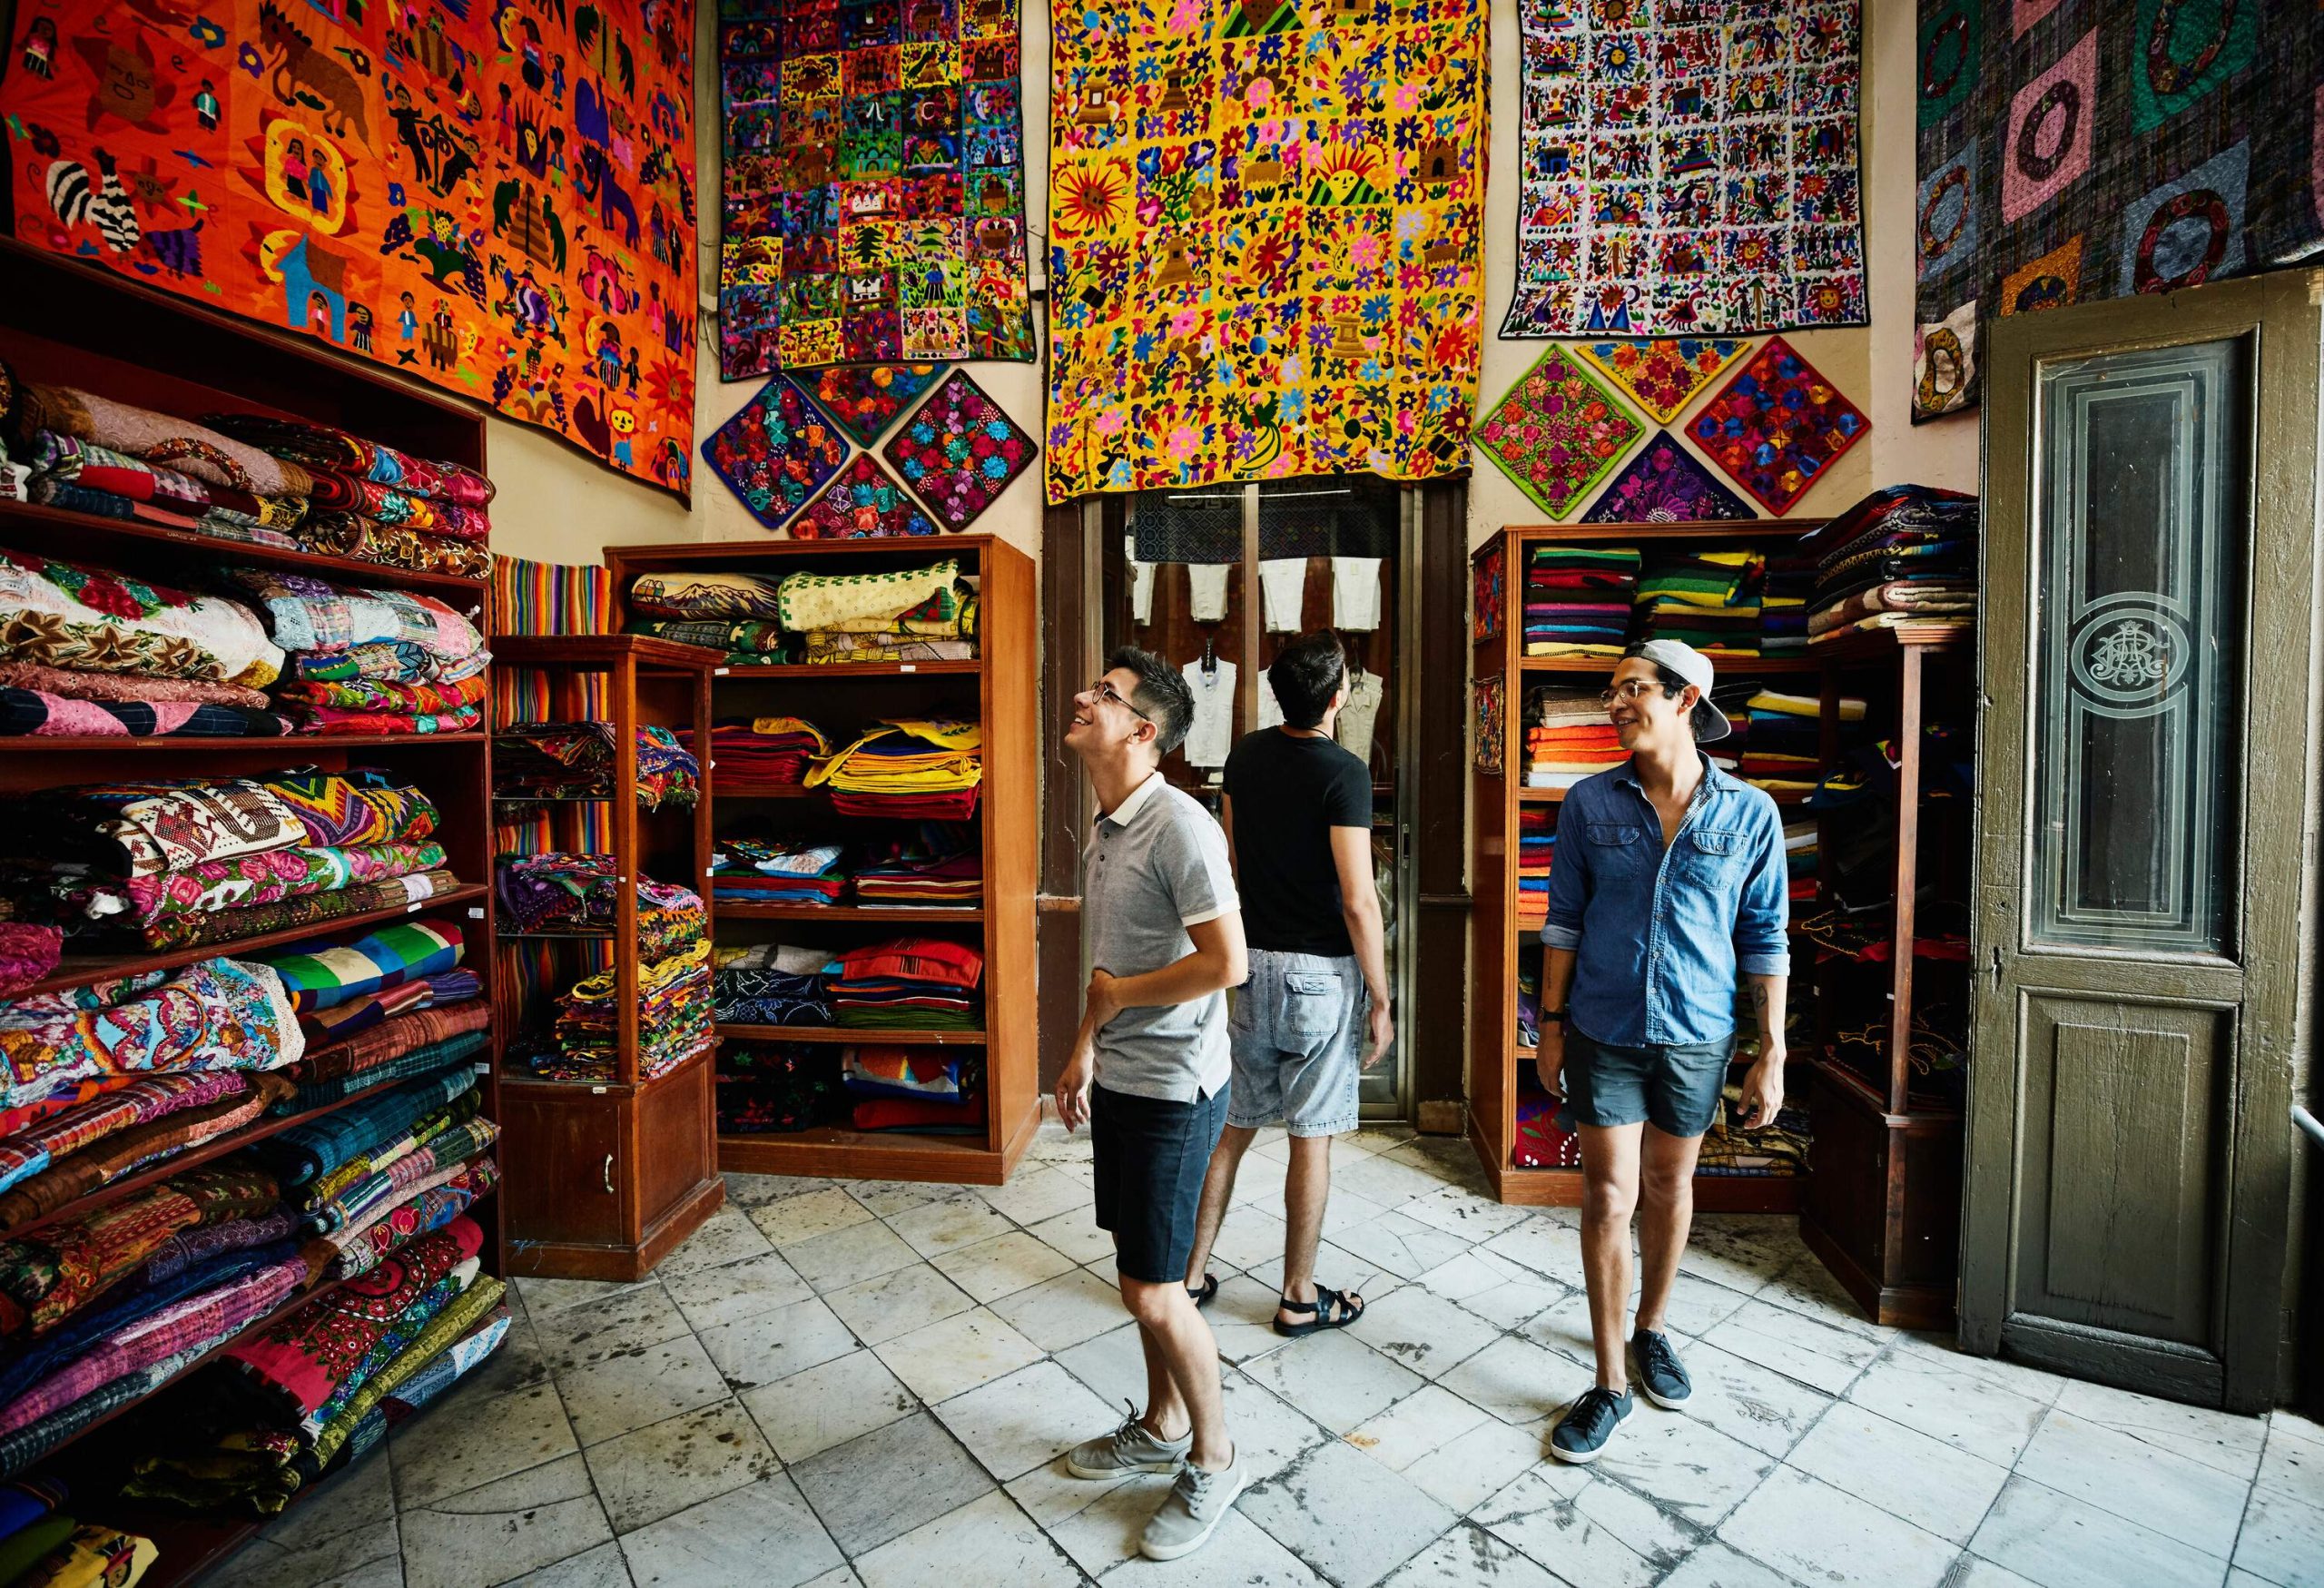 Three individuals explore the enchanting world of carpets within a vibrant store, their eyes captivated by the intricately woven designs adorning the walls and shelves.